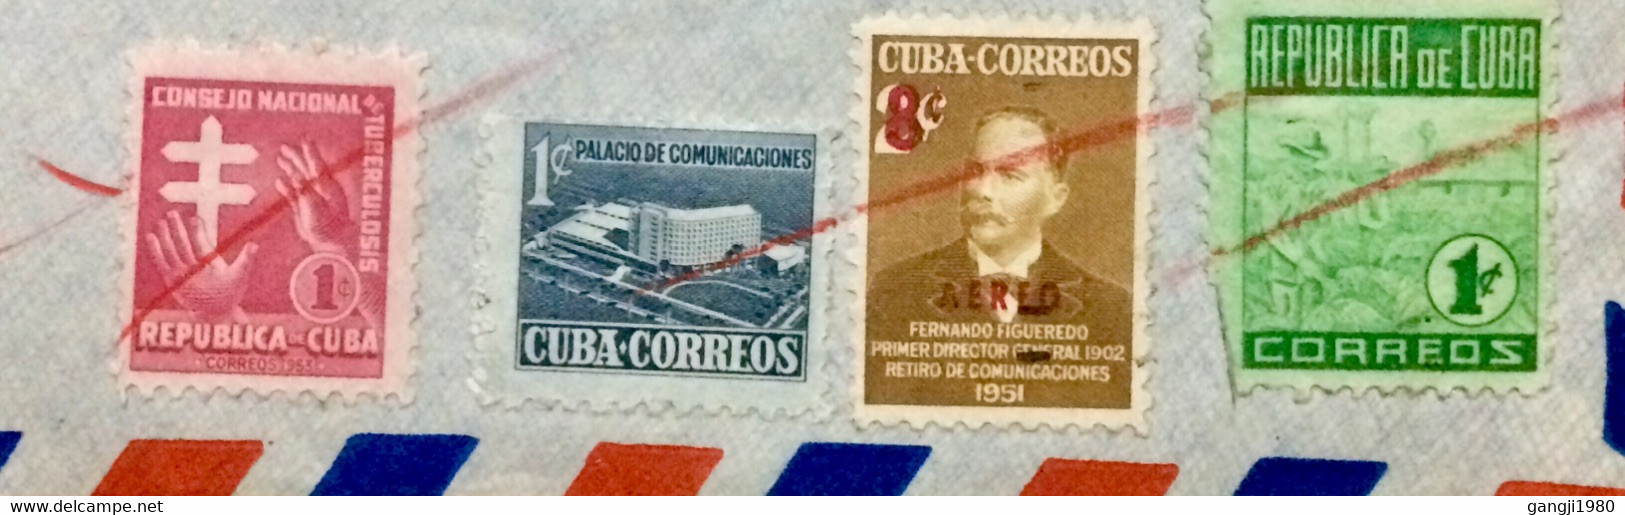 CUBA 1952, COVER USED TO USA, F.FIGUEREDO STAMP OVPTD, POST BUILDING, TOBACCO, TUBERCULOSIS, NEW YORK, OLD CHELSEA STATI - Lettres & Documents